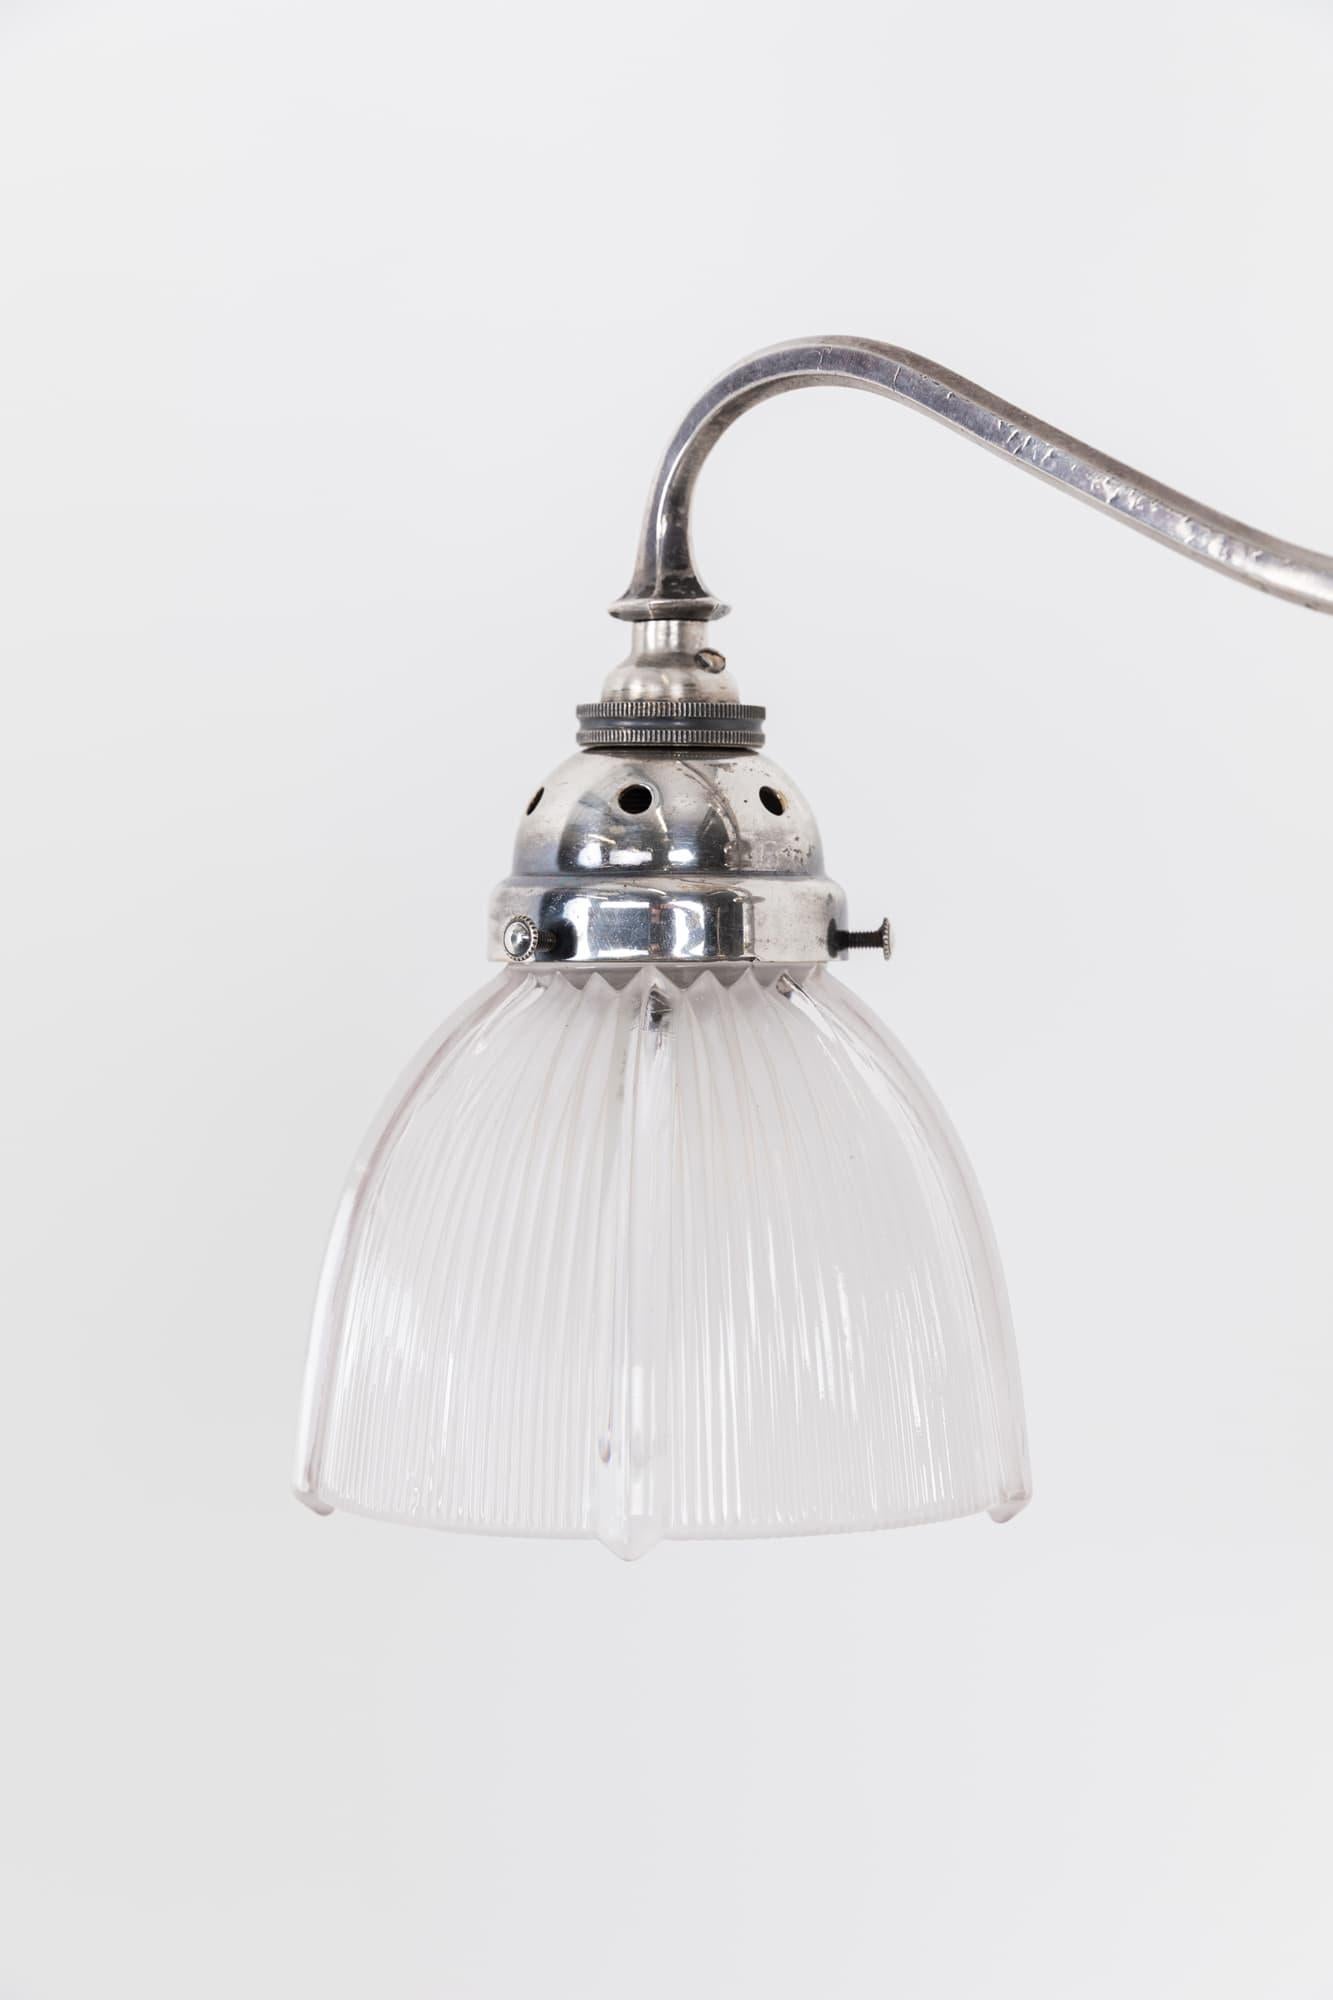 Pressed Edwardian Faraday & Son Rise and Fall Prismatic Glass Ceiling Light Lamp, c.1910